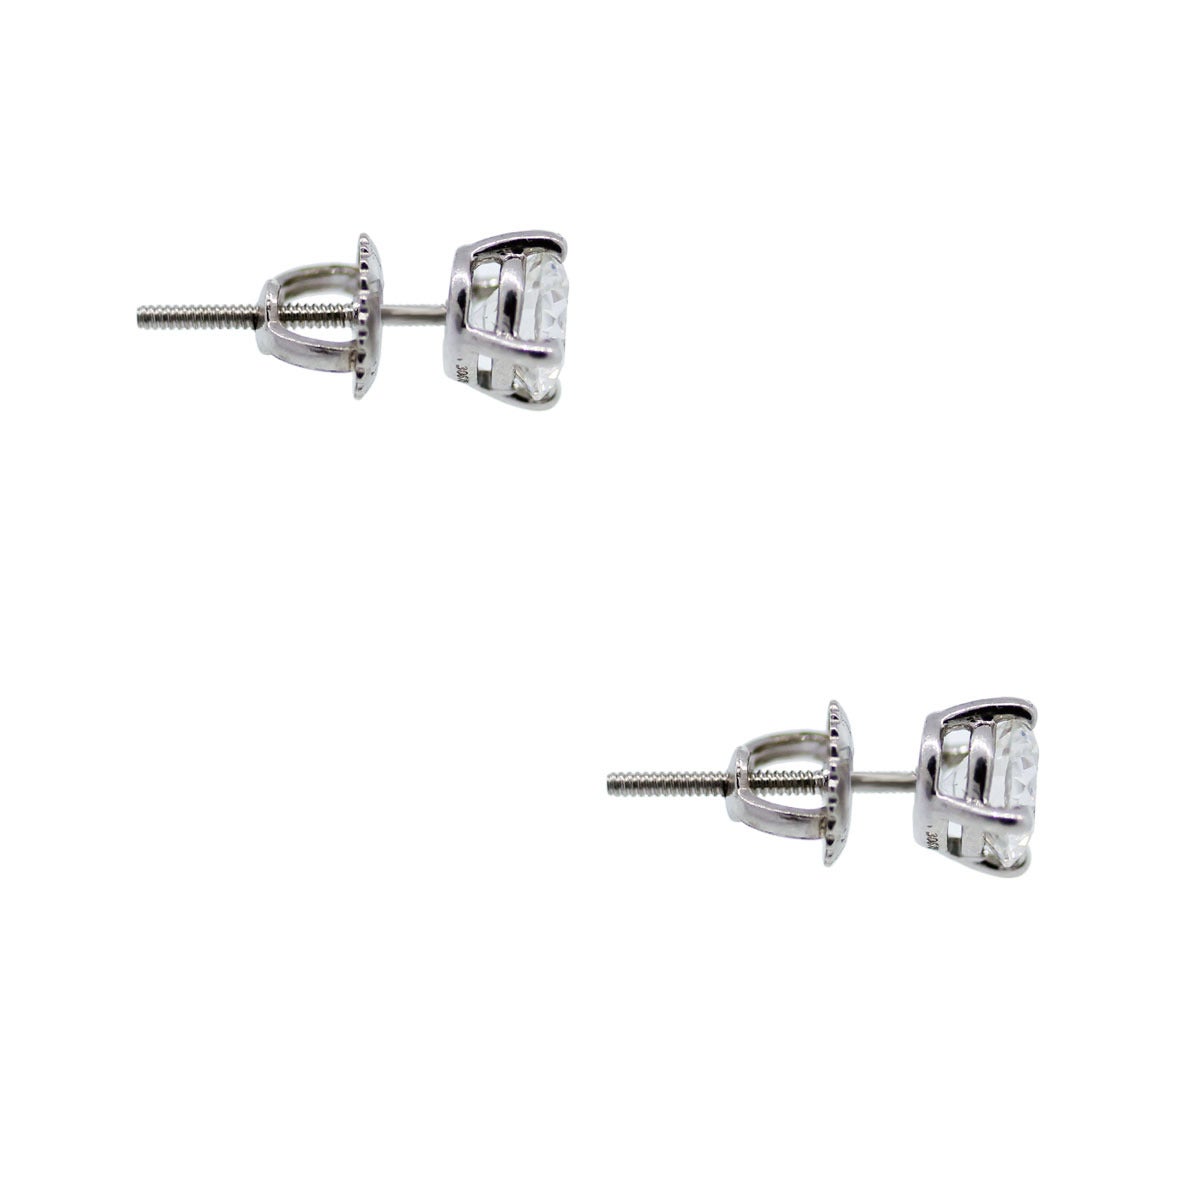 Brand : Tiffany & Co.
Style: Certified 1.16ctw Diamond Stud Earrings
Material: 14k White Gold
Diamond Details: 1.16ctw of Round Brilliant Diamonds that are H in color VS2 in clarity
Earring Backs : Screw Back
Total Weight: 1.4dwt